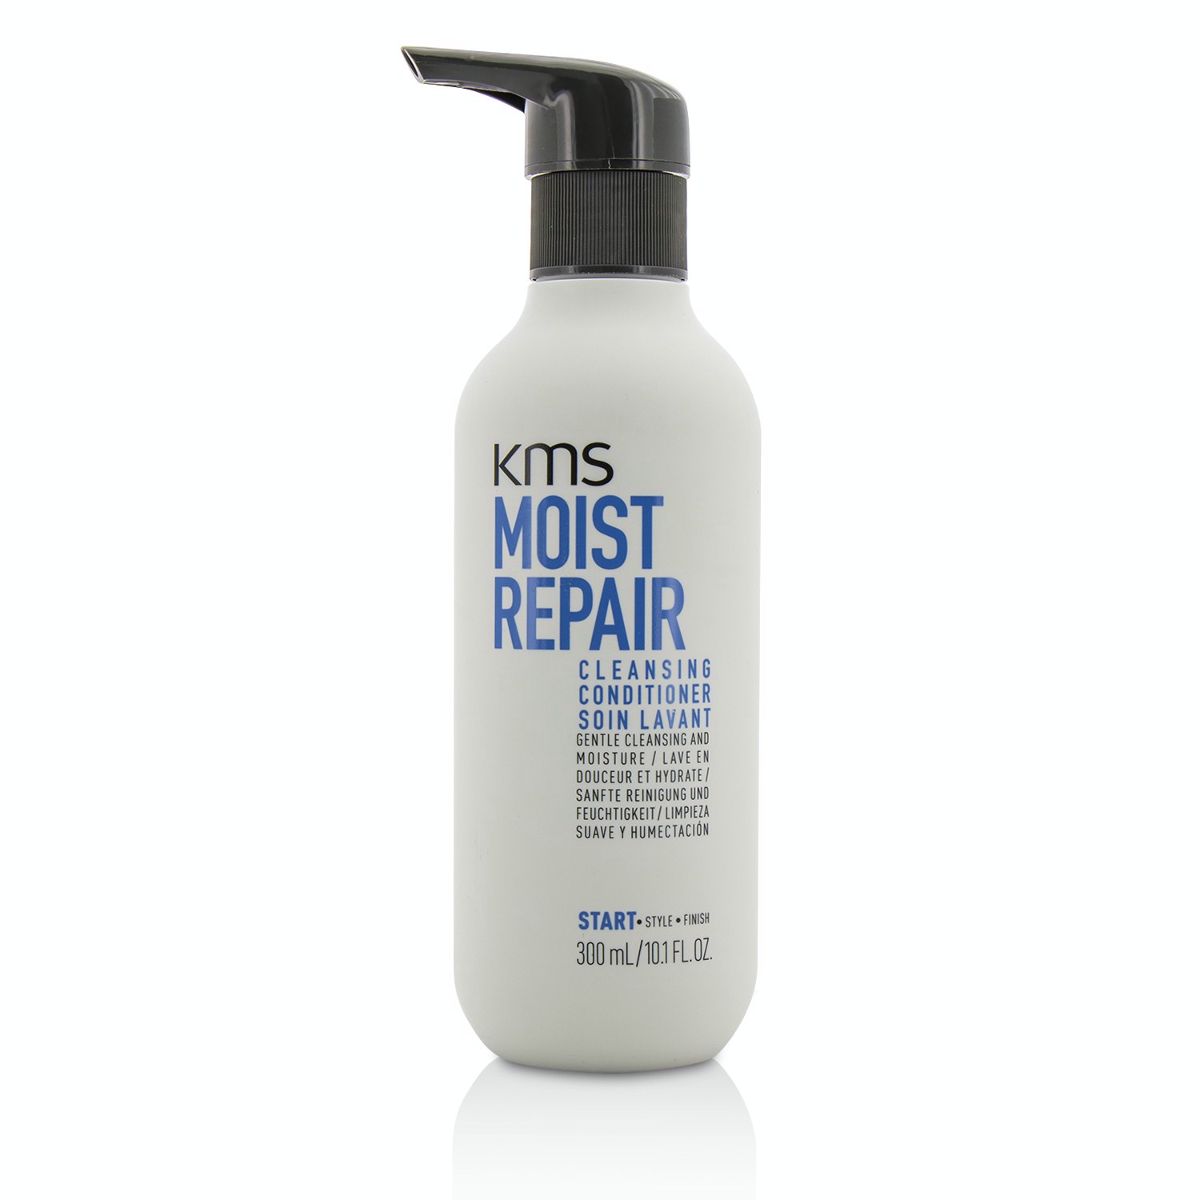 Moist Repair Cleansing Conditioner (Gentle Cleansing and Moisture) KMS California Image